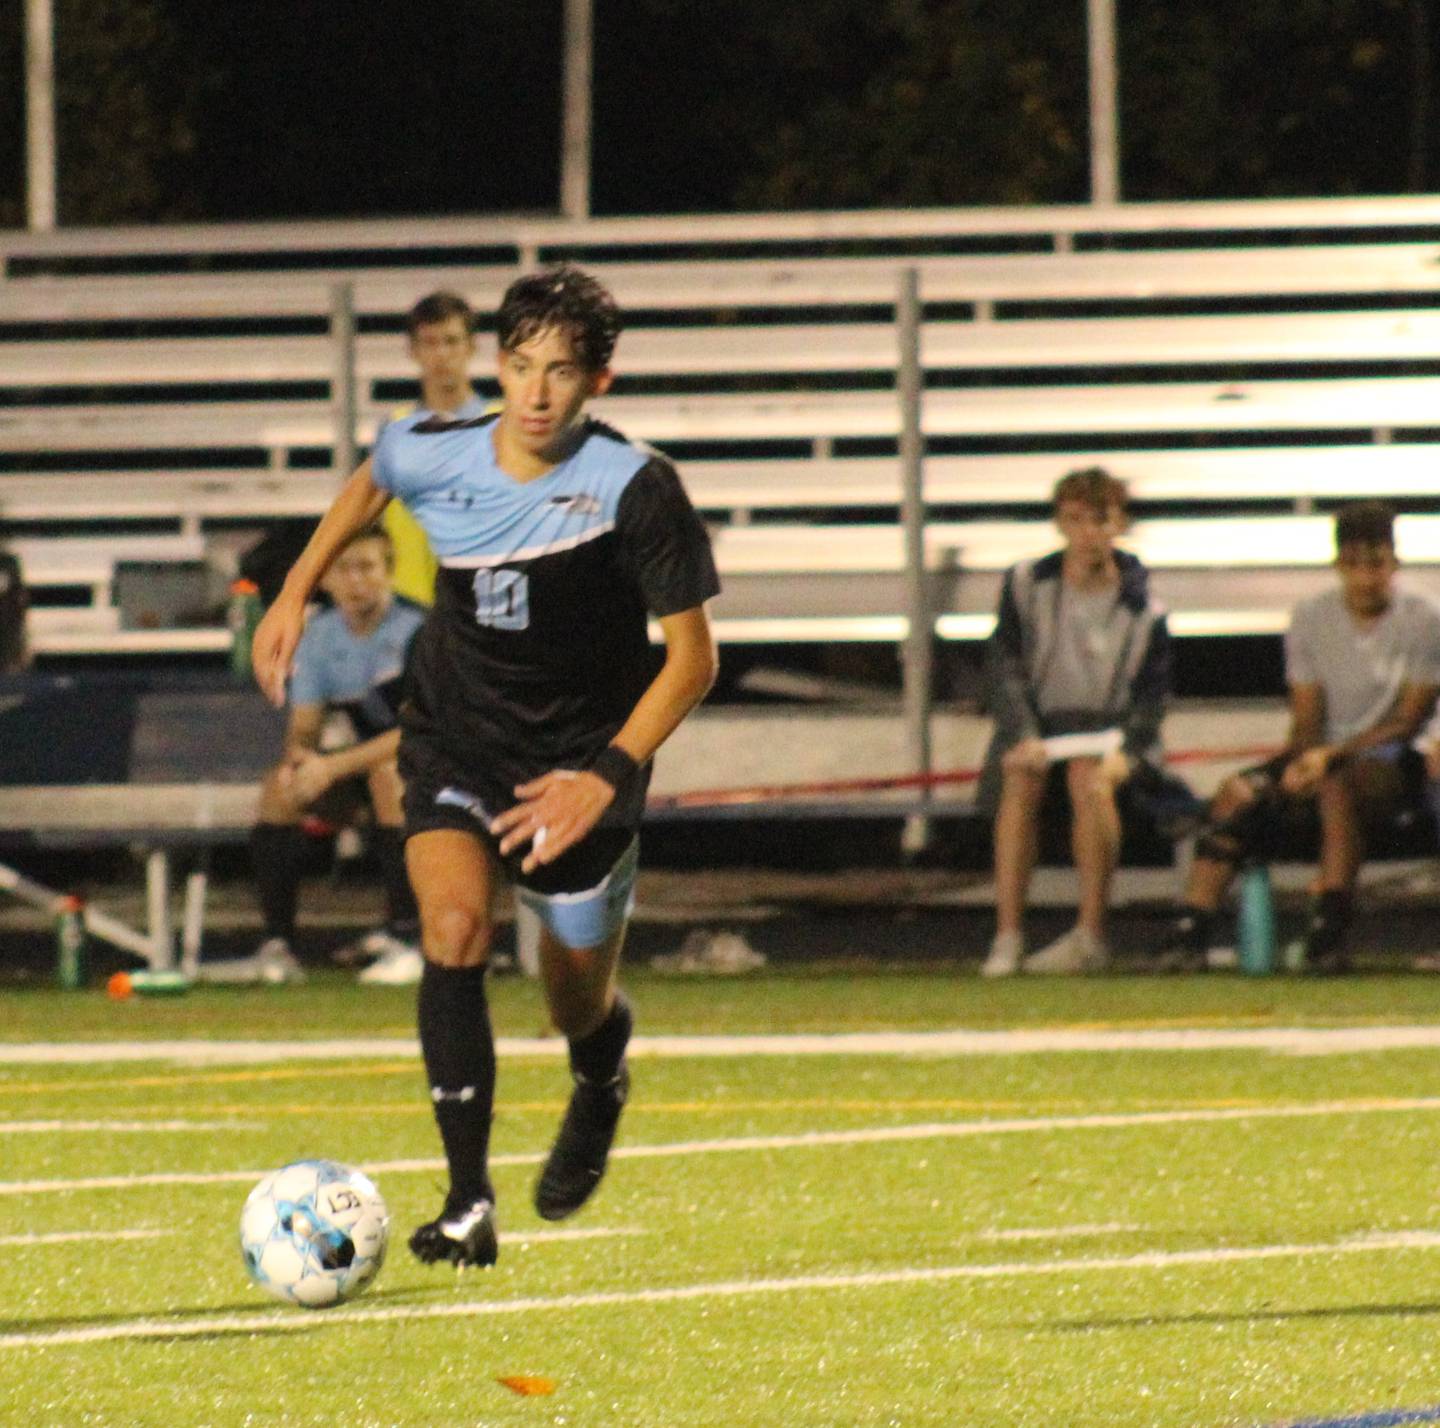 Lucas Evans had a big evening for South River boys soccer Thursday. He finished with two goals as the 15th-ranked Seahaws topped No. 5 Broadneck, 4-0, in Edgewater.